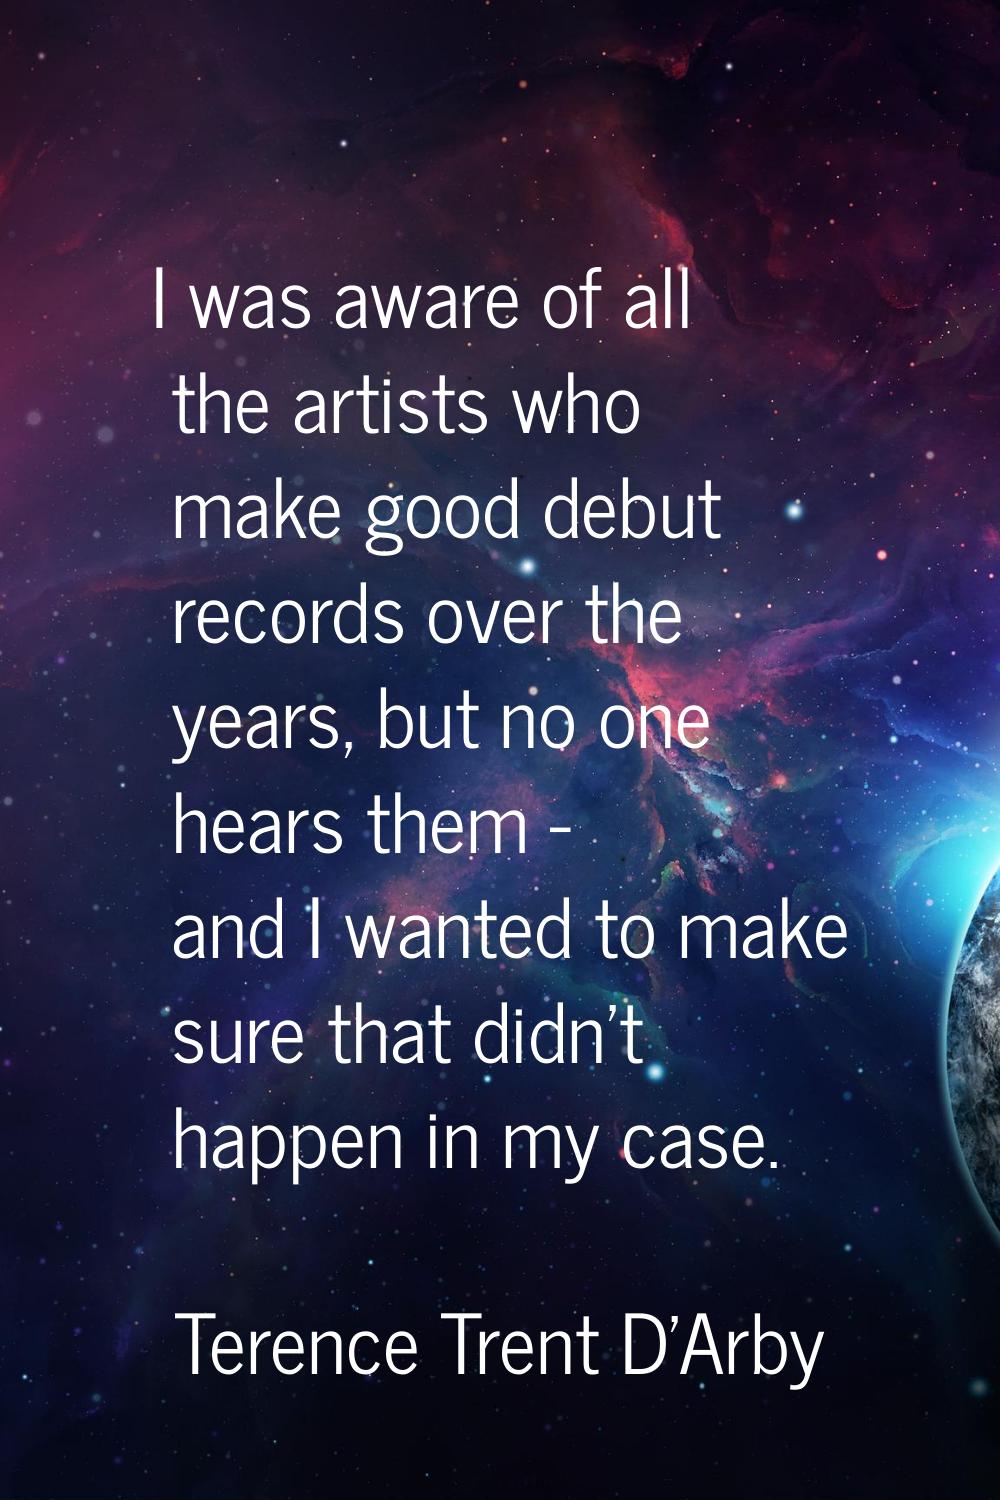 I was aware of all the artists who make good debut records over the years, but no one hears them - 